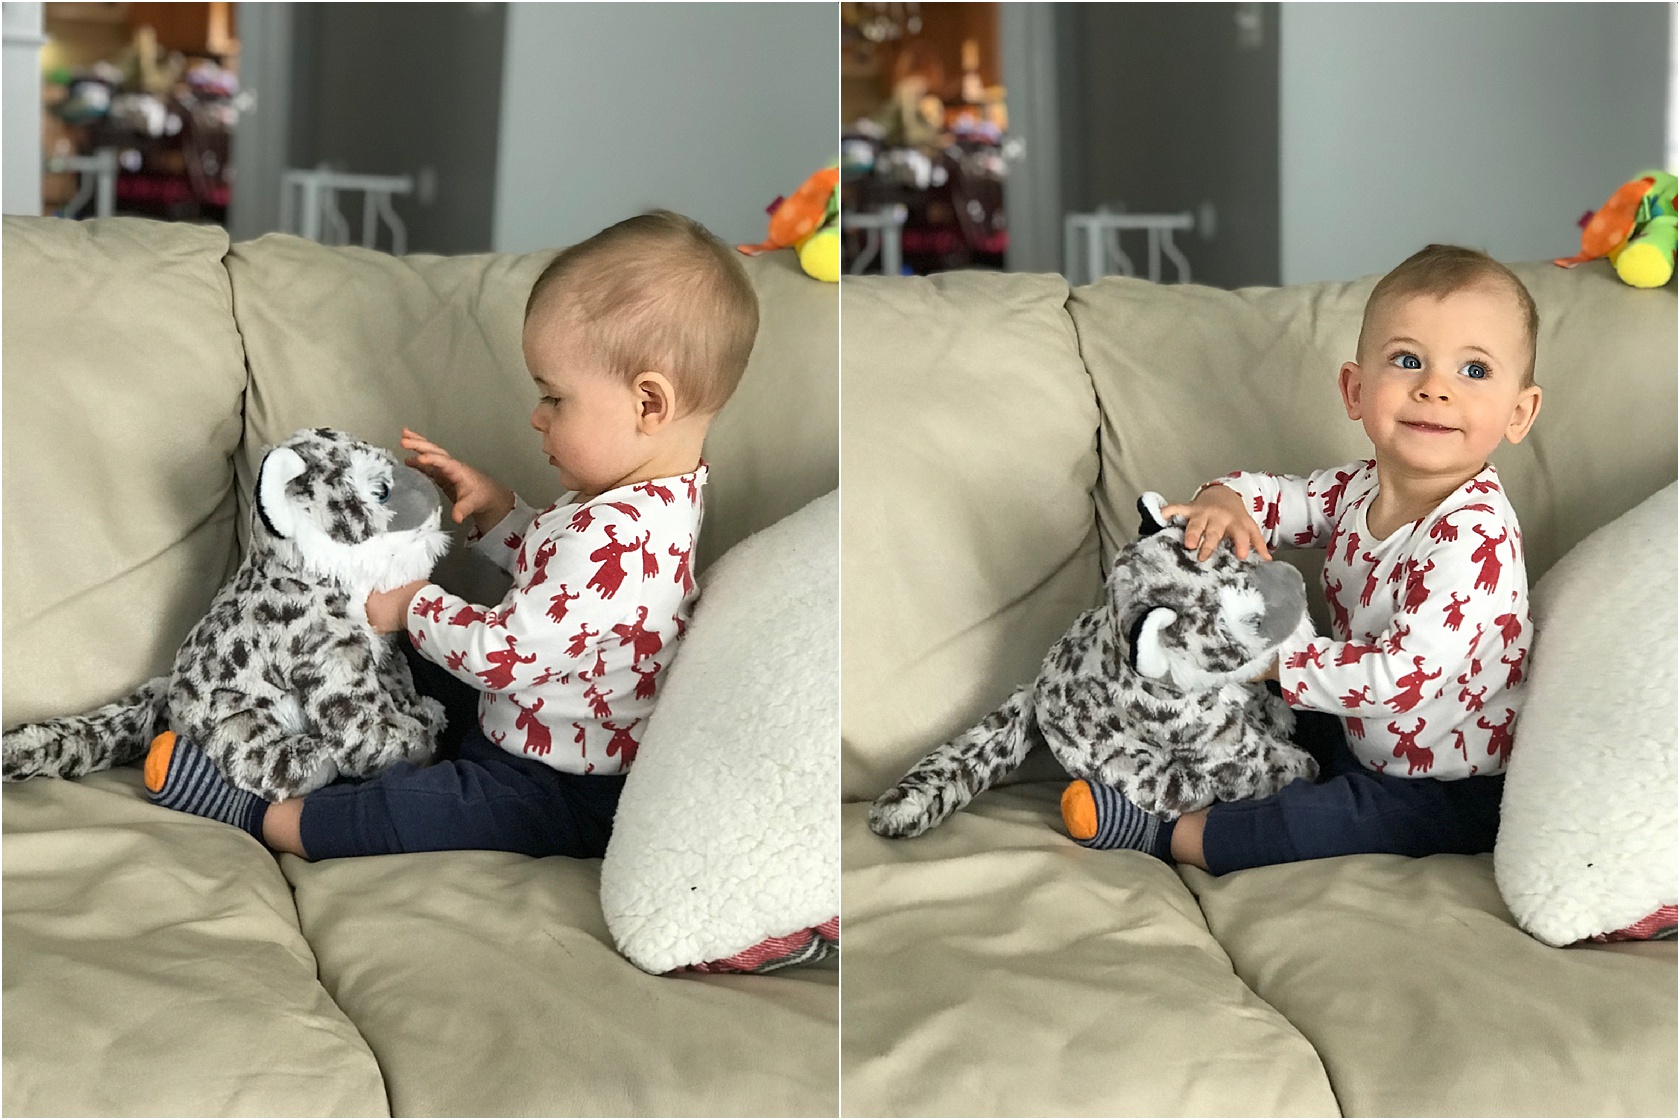  Zeke LOVED his snow leopard! He was givin' him cuddles! 